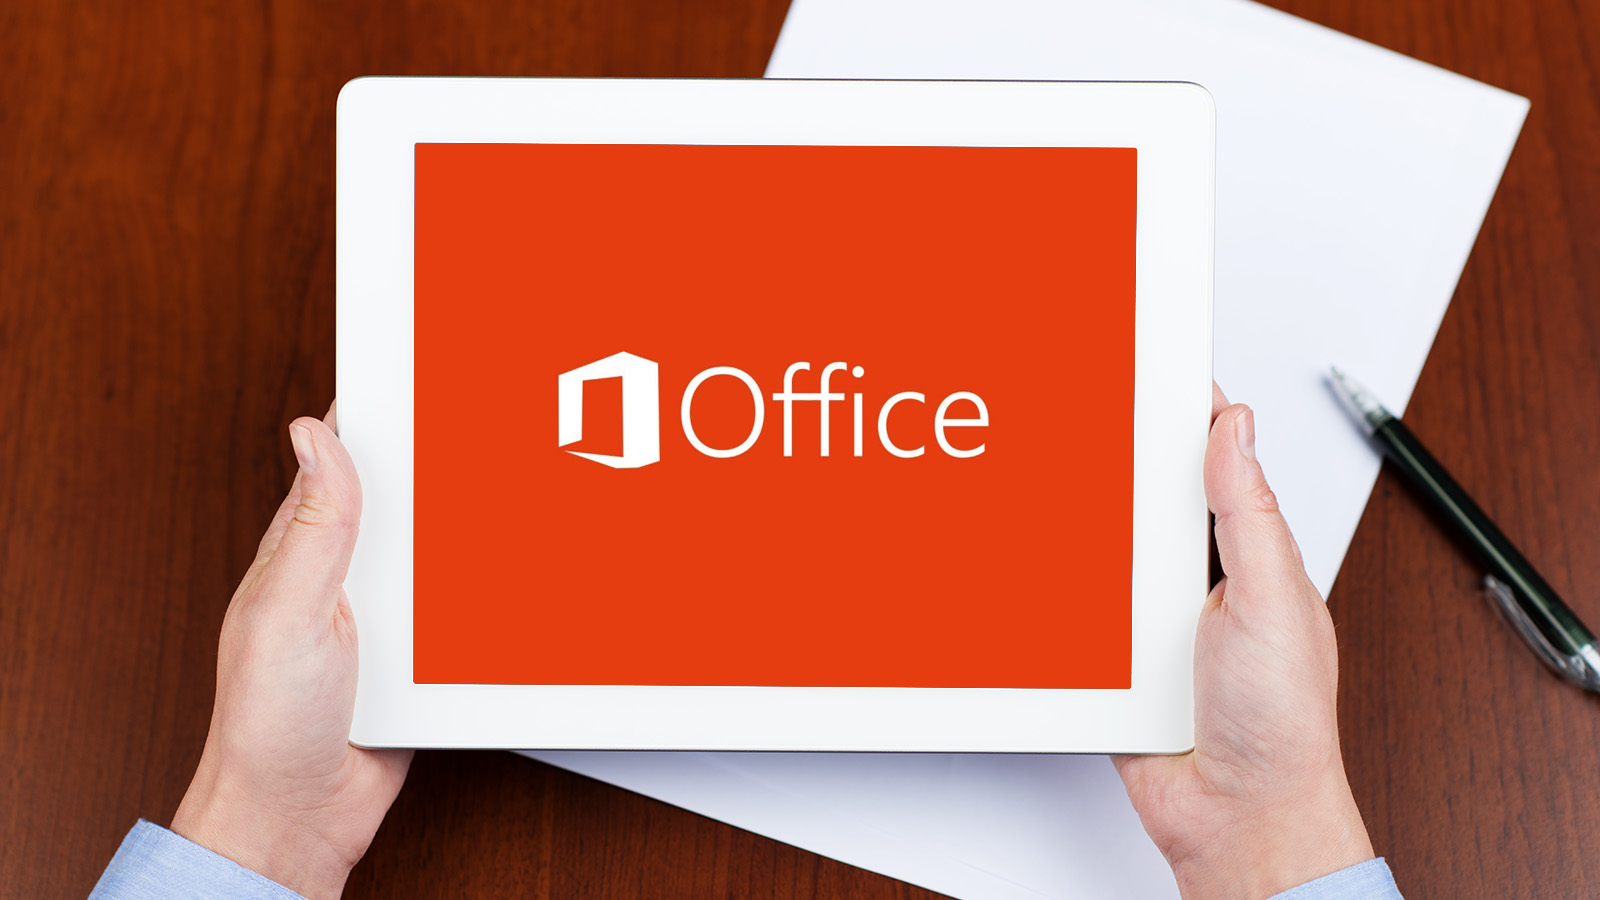 Microsoft-Ready-to-Launch-Office-for-iPhone-iPad-Reuters-432305-2